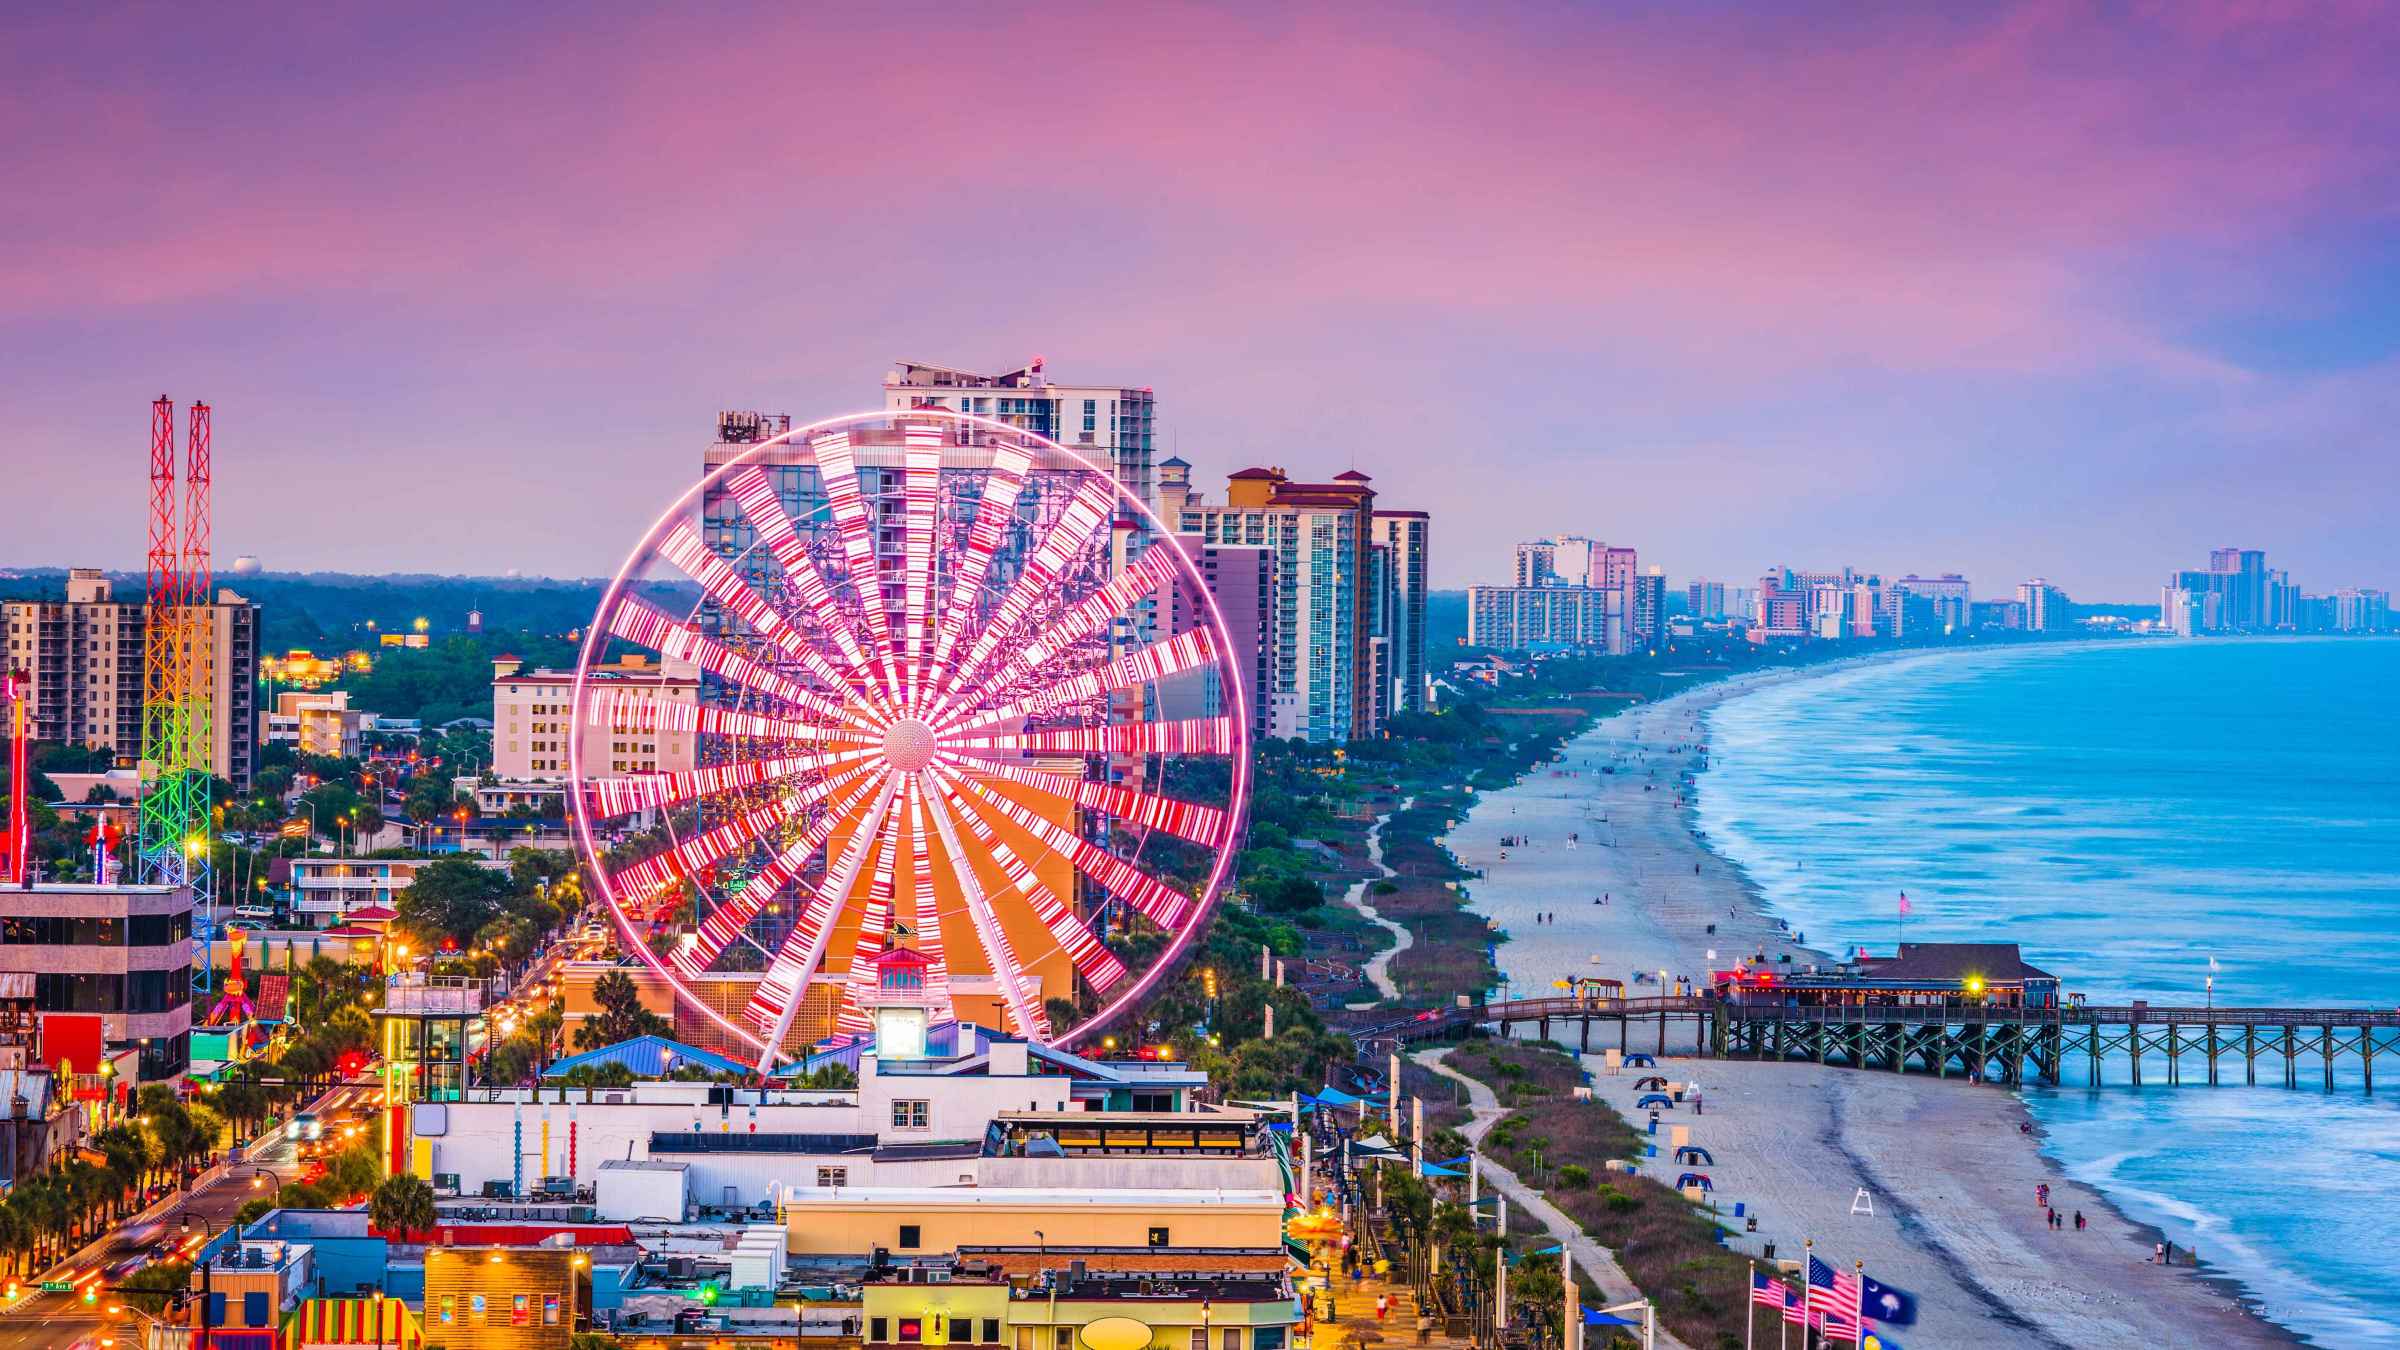 Myrtle Beach 2021 Top 10 Tours & Activities (with Photos) Things to